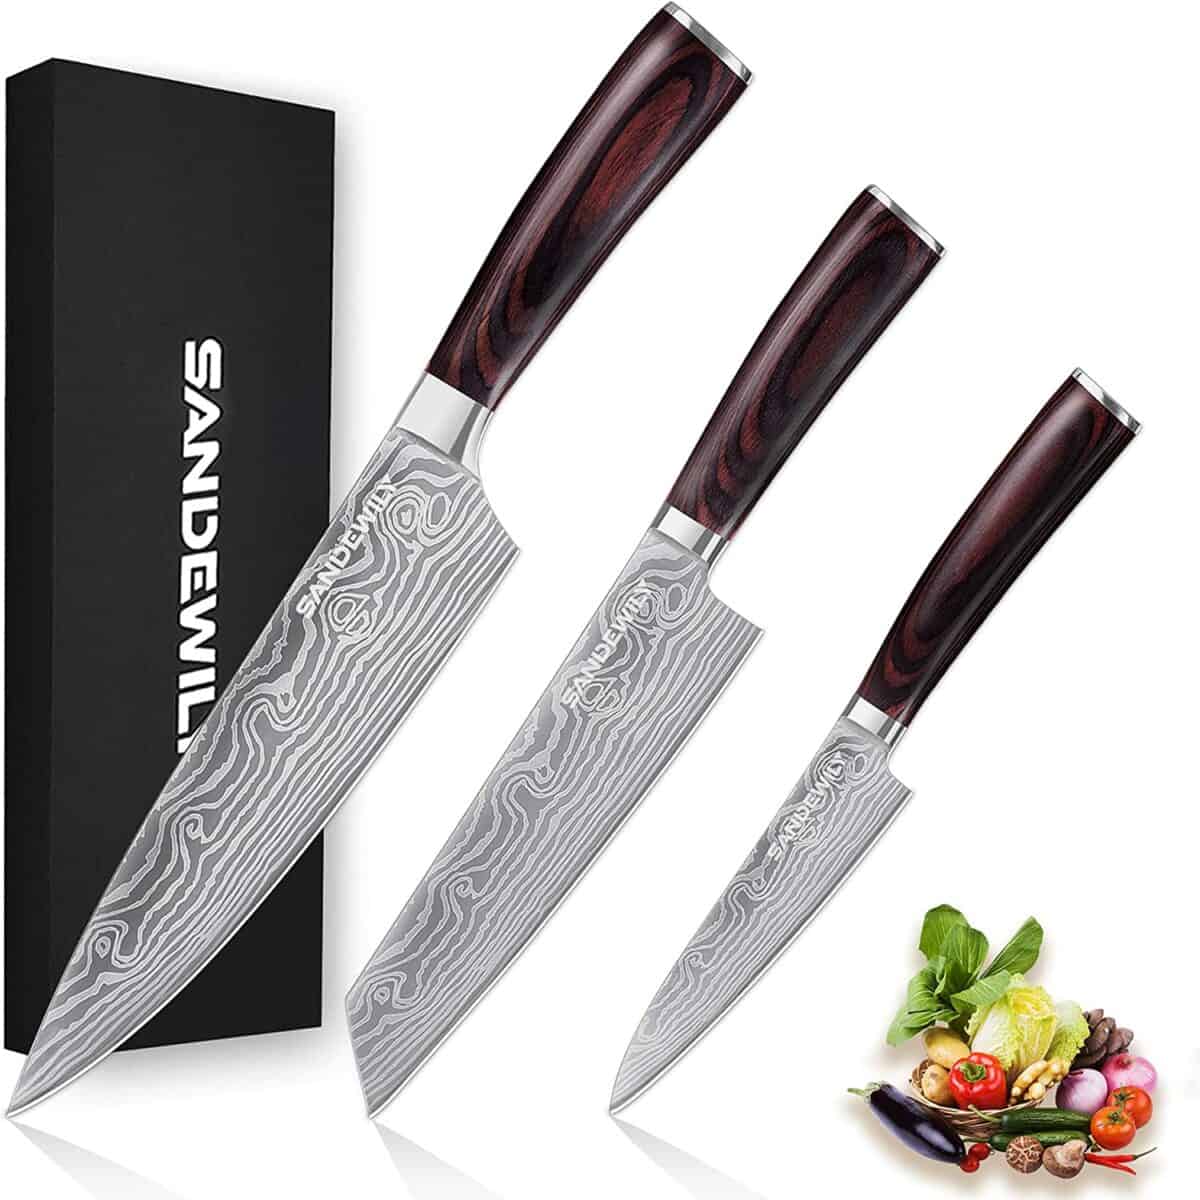 Sandewily 3-Piece Chef Knife Set review